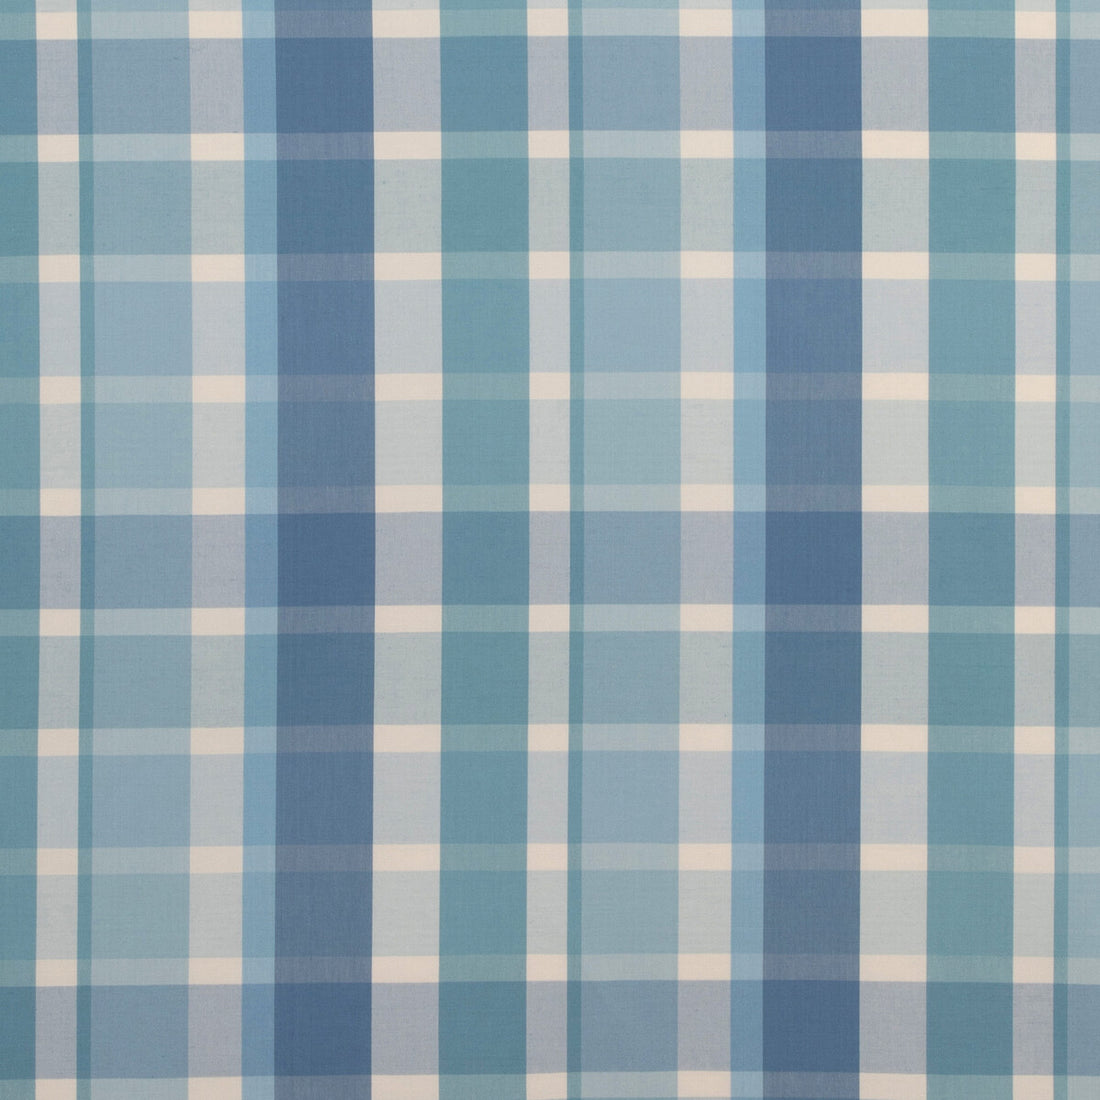 Fisher Plaid fabric in capri/sky color - pattern 2023107.55.0 - by Lee Jofa in the Highfield Stripes And Plaids collection